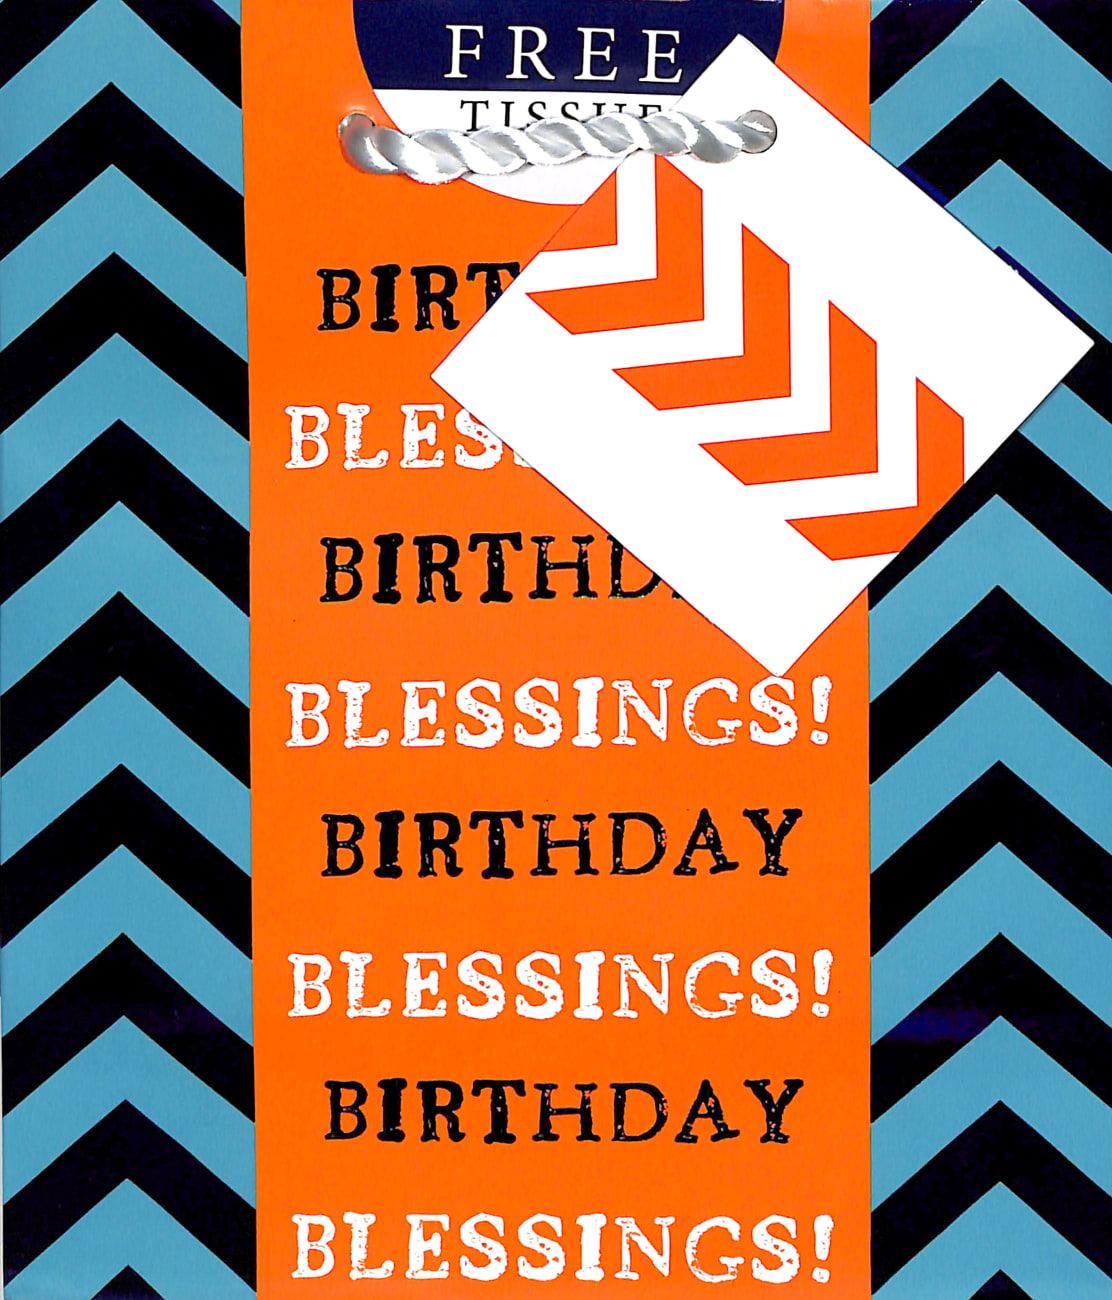 Gift Bag Small: Birthday Blessings (Incl Two Sheets Tissue Paper & Gift Tag) Stationery